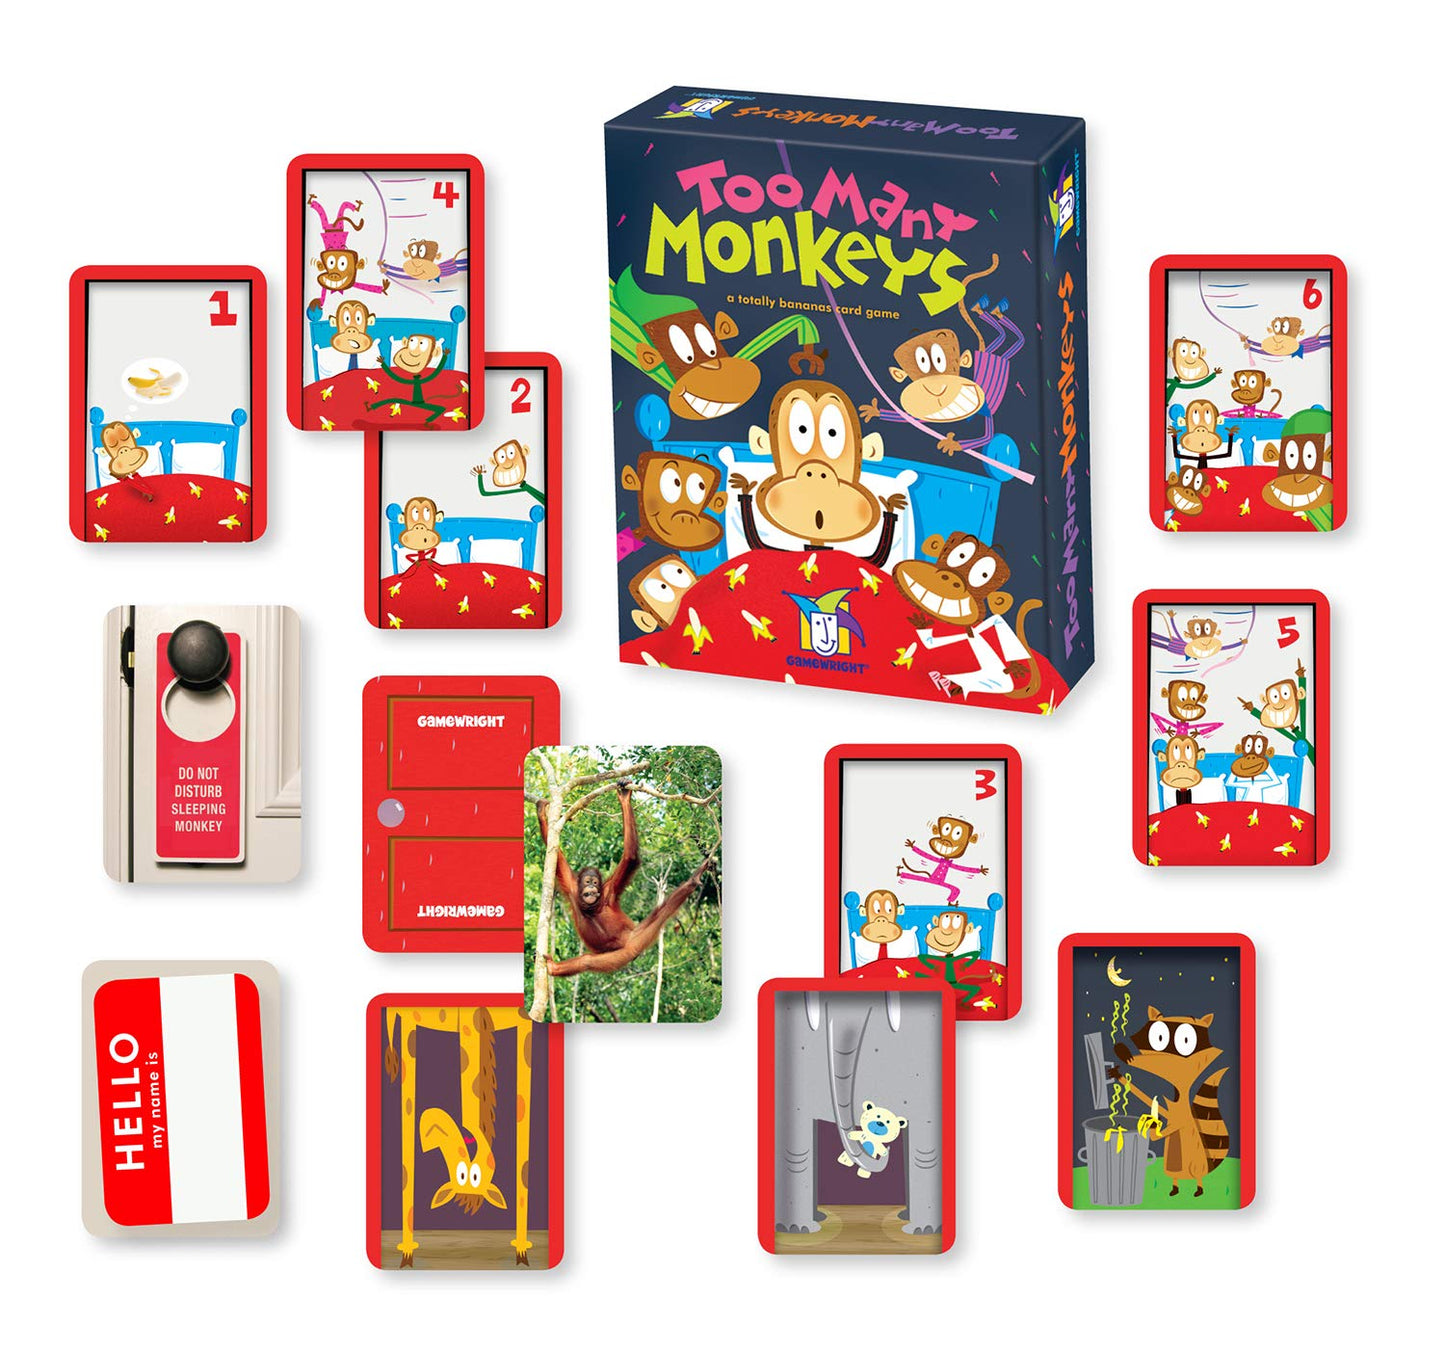 Gamewright Too Many Monkeys Multi-colored, 5"